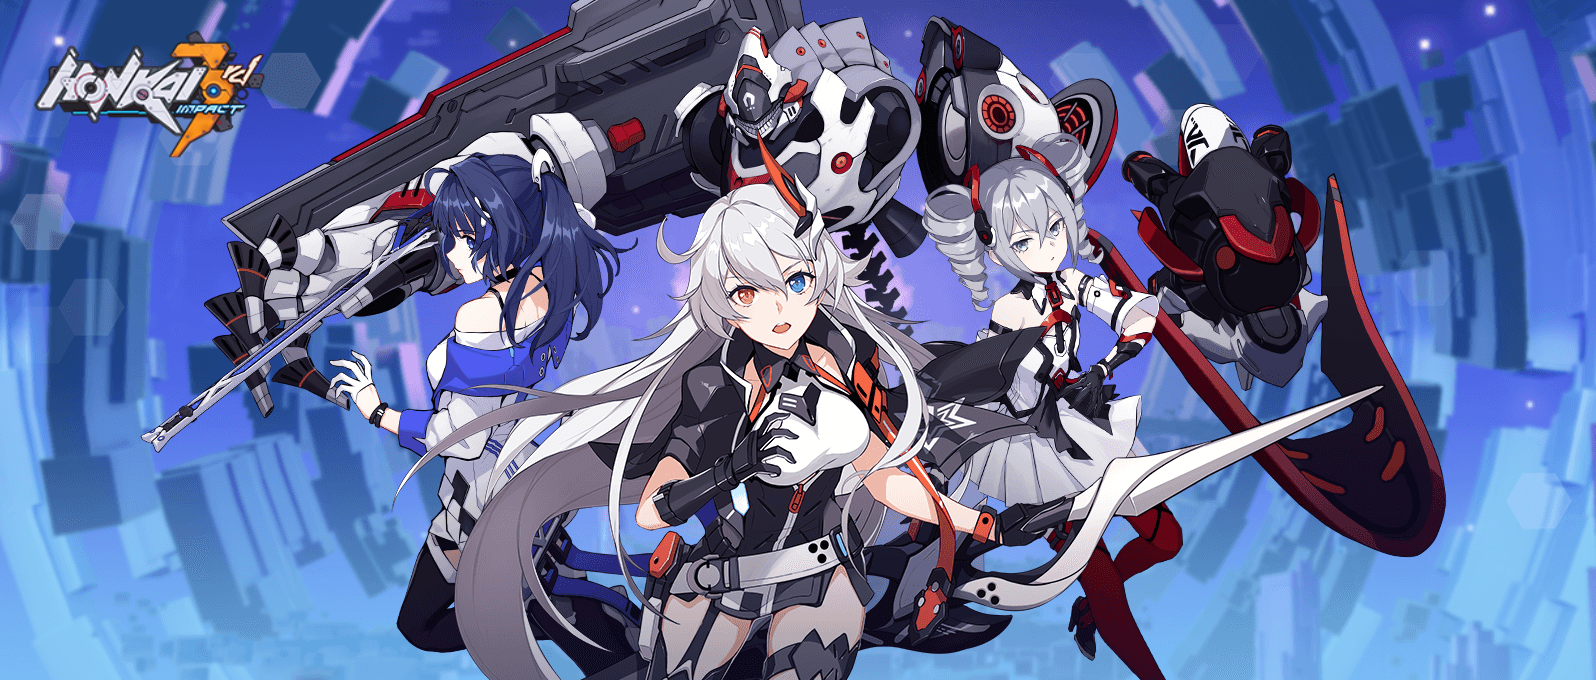 Honkai Impact 3 PC Version Officially Released - You can Synchronized it with Your Mobile Account